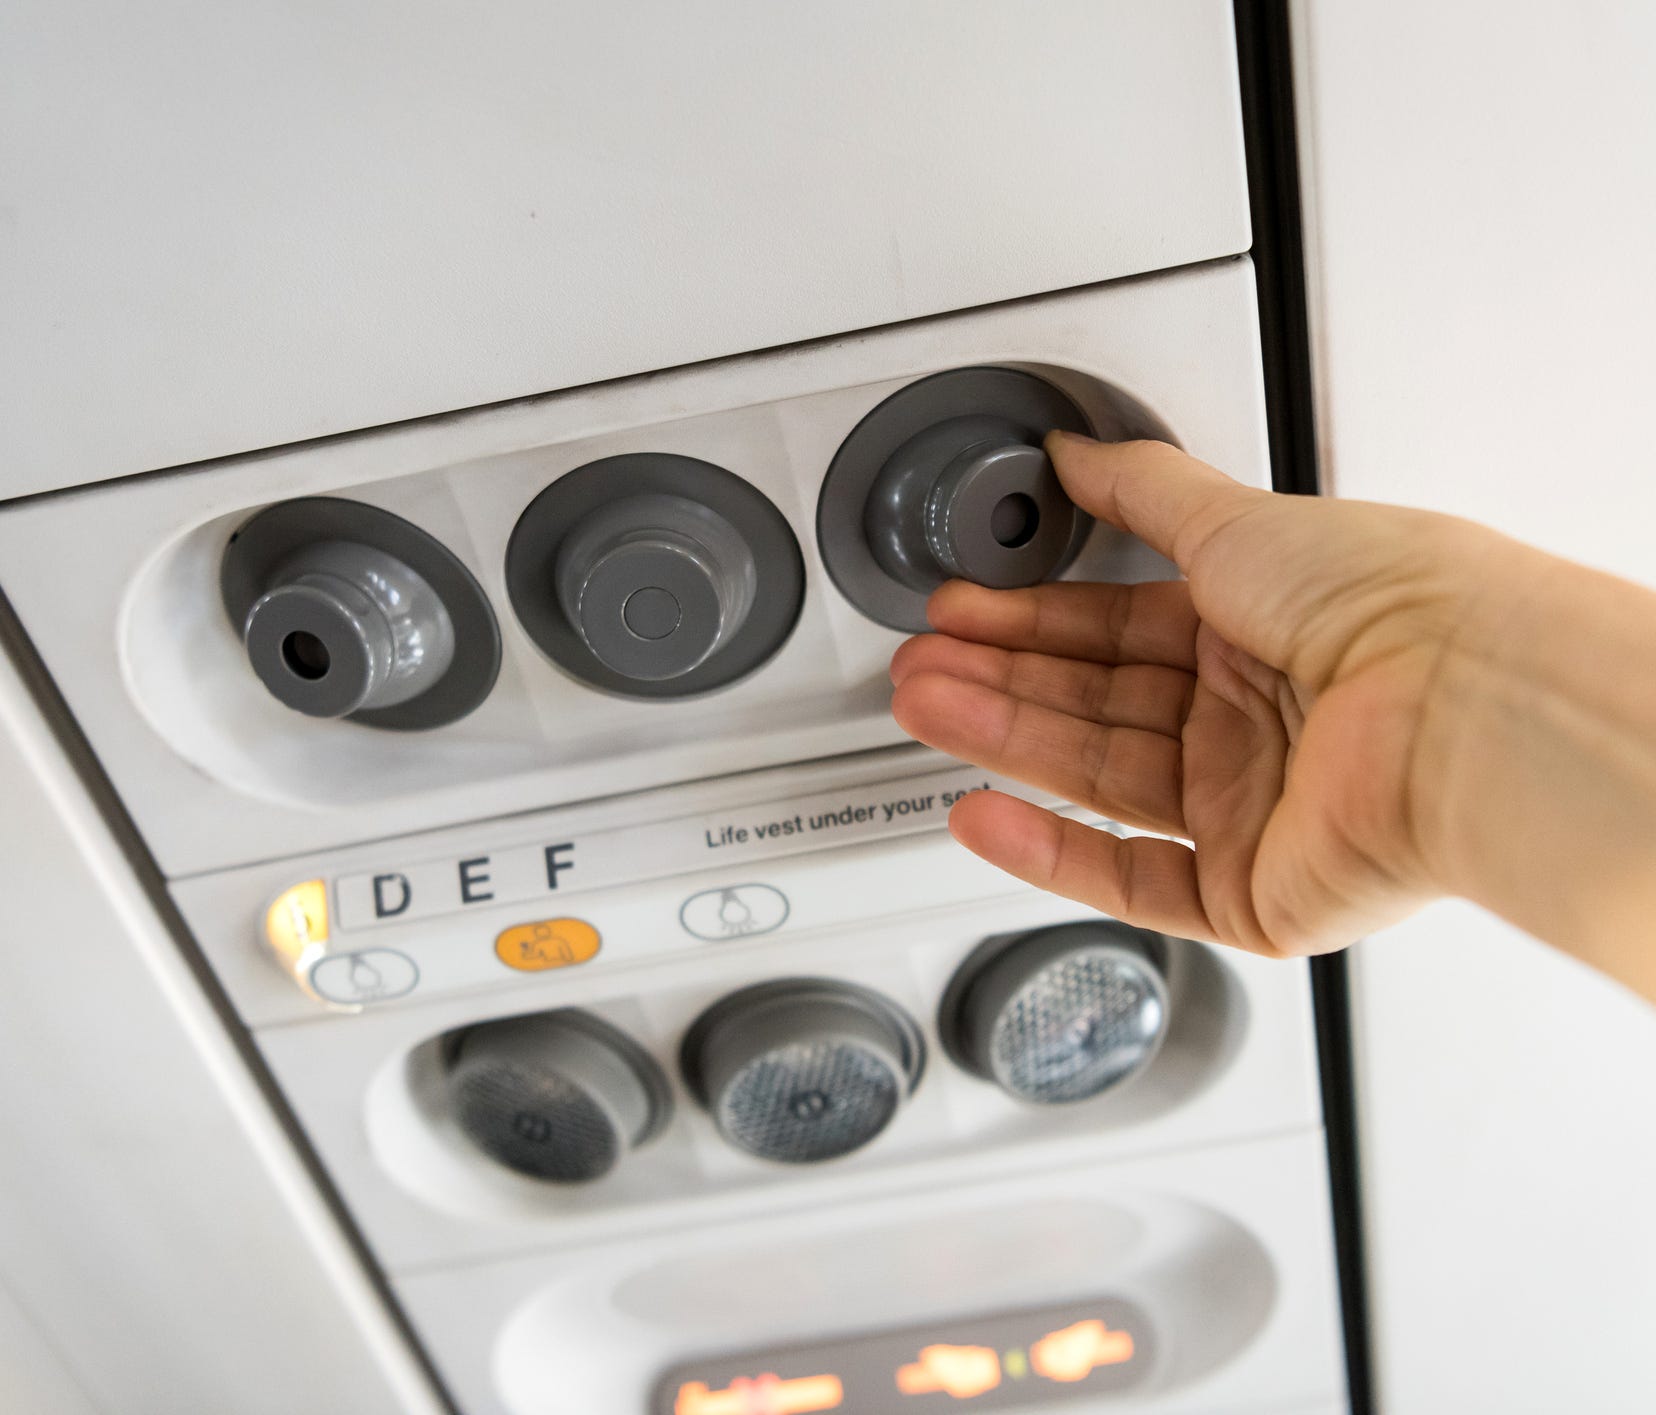 Under certain conditions, airplane cabins may not have adequate air conditioning to keep passengers cool.